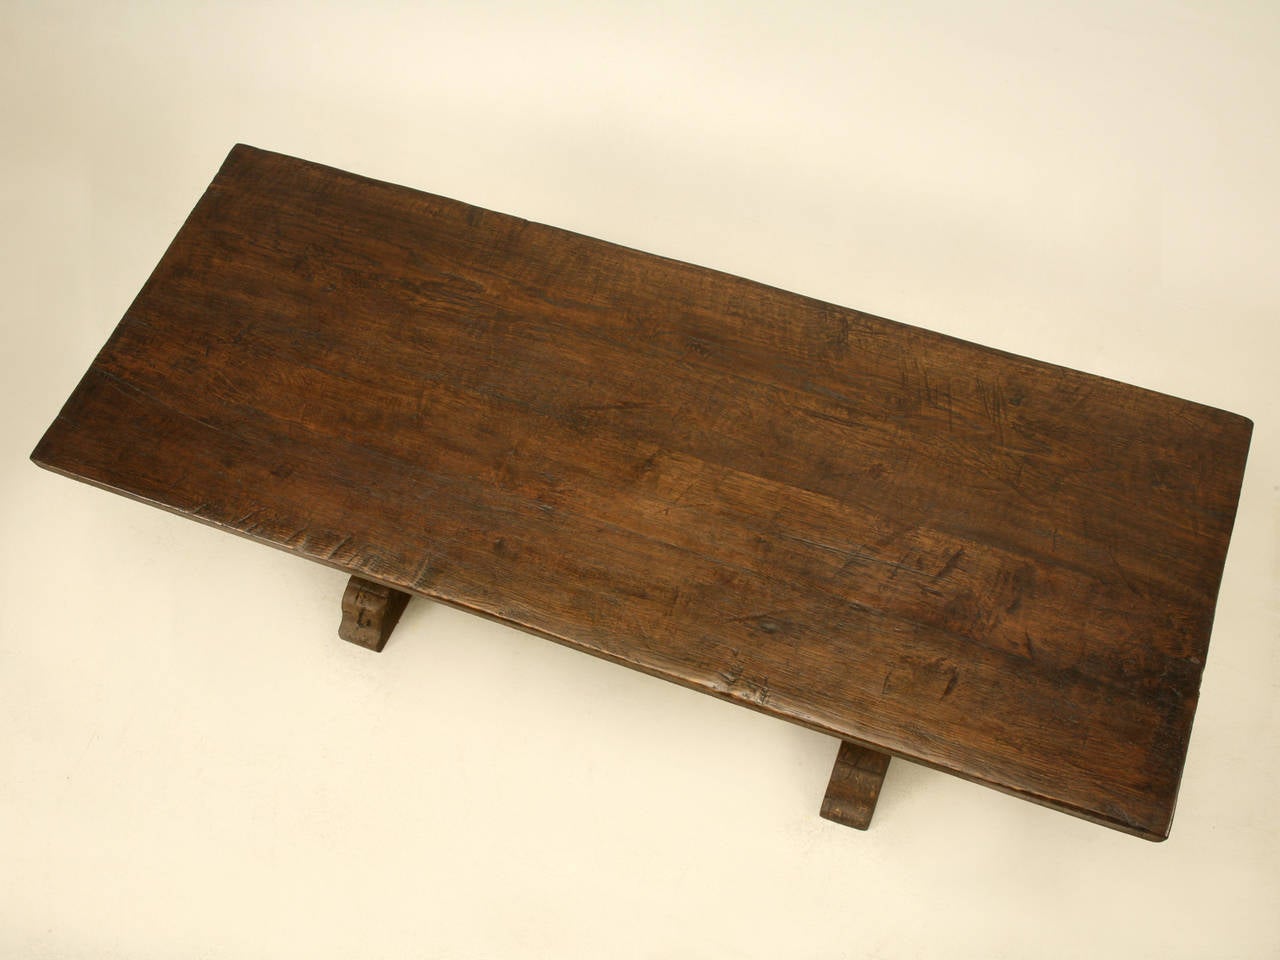 Antique French farm or trestle table made from white oak in the late 1800’s and just completely rebuilt by our in house shop. One of the benefits of a trestle design table is that you can comfortably seat 8 at this six and a half foot table, where